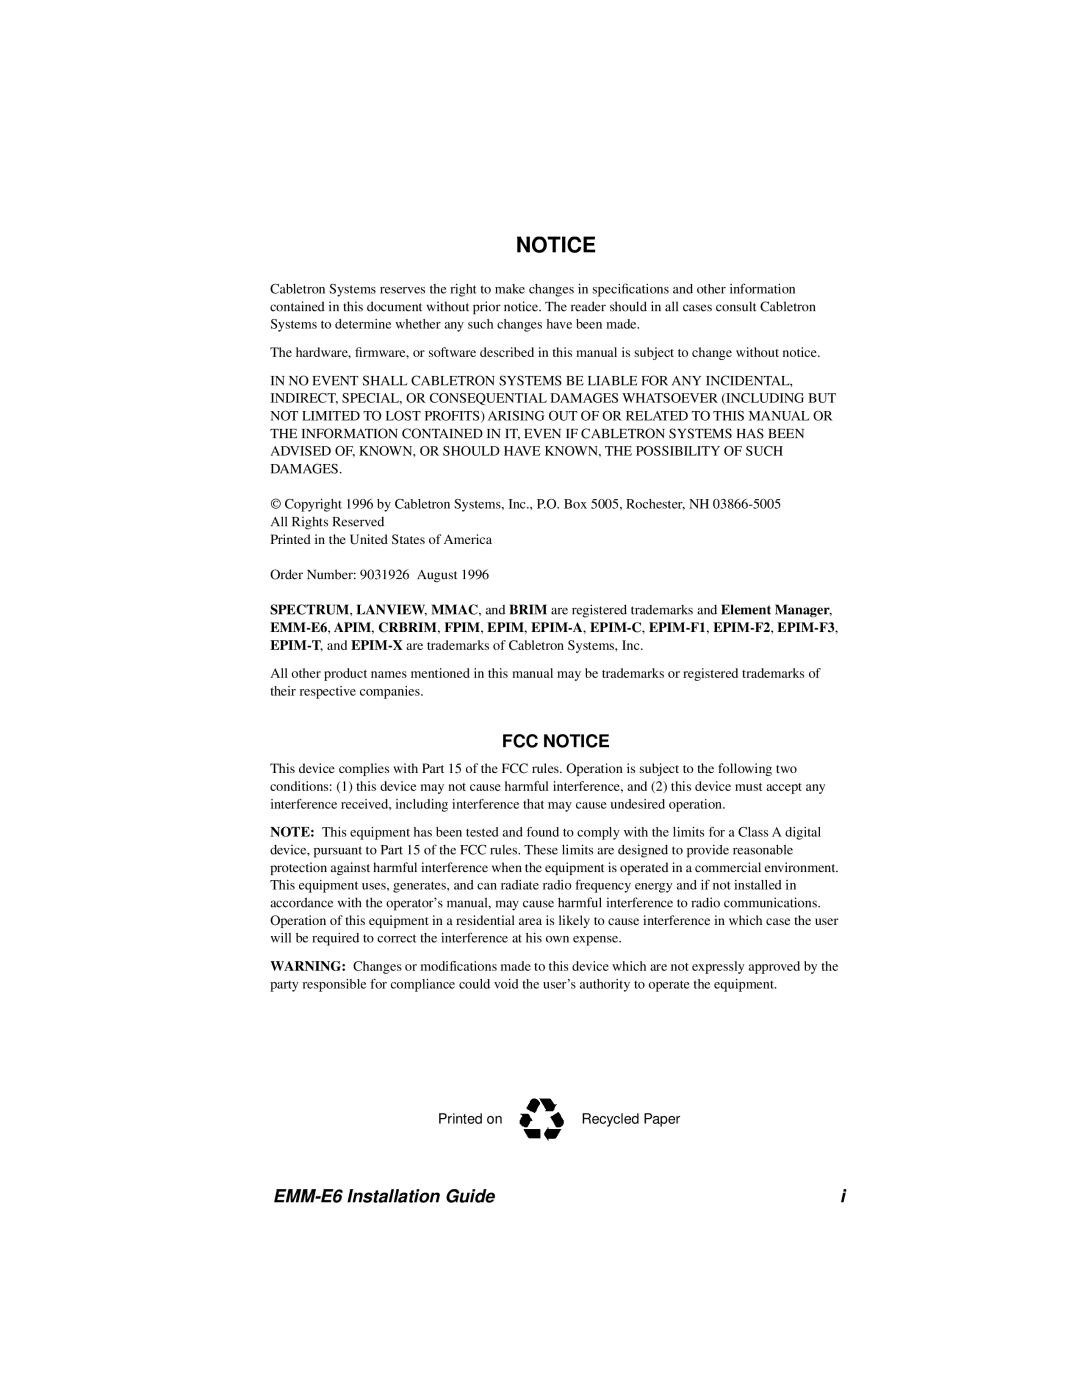 Cabletron Systems manual Fcc Notice, EMM-E6 Installation Guide 